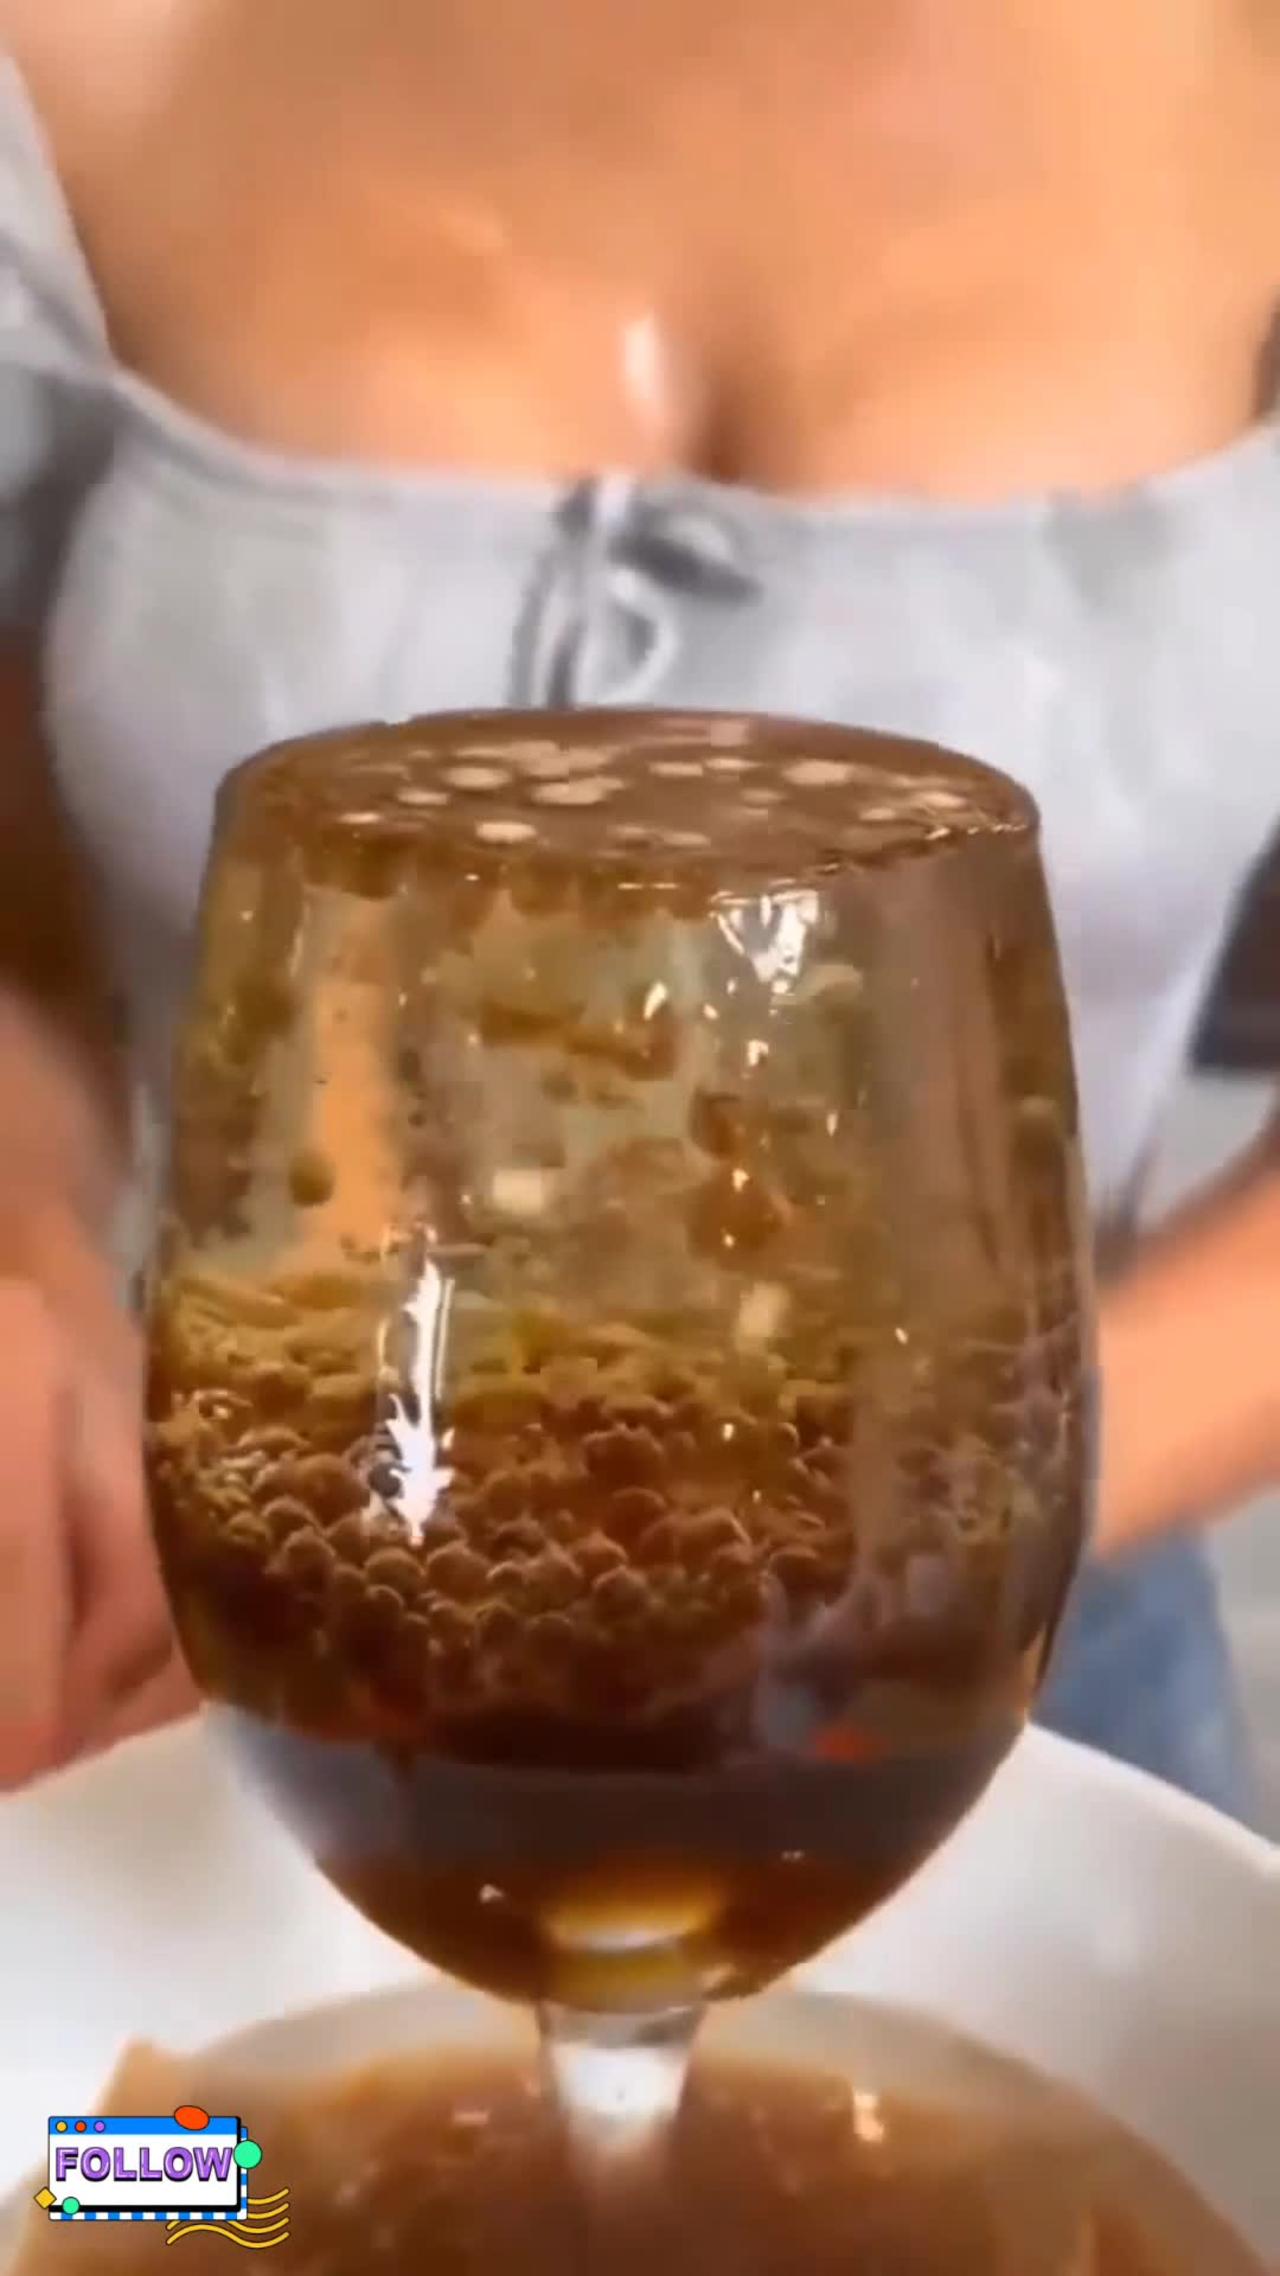 OMG She lifts the top glass to show what Coke and Mentos does in oil